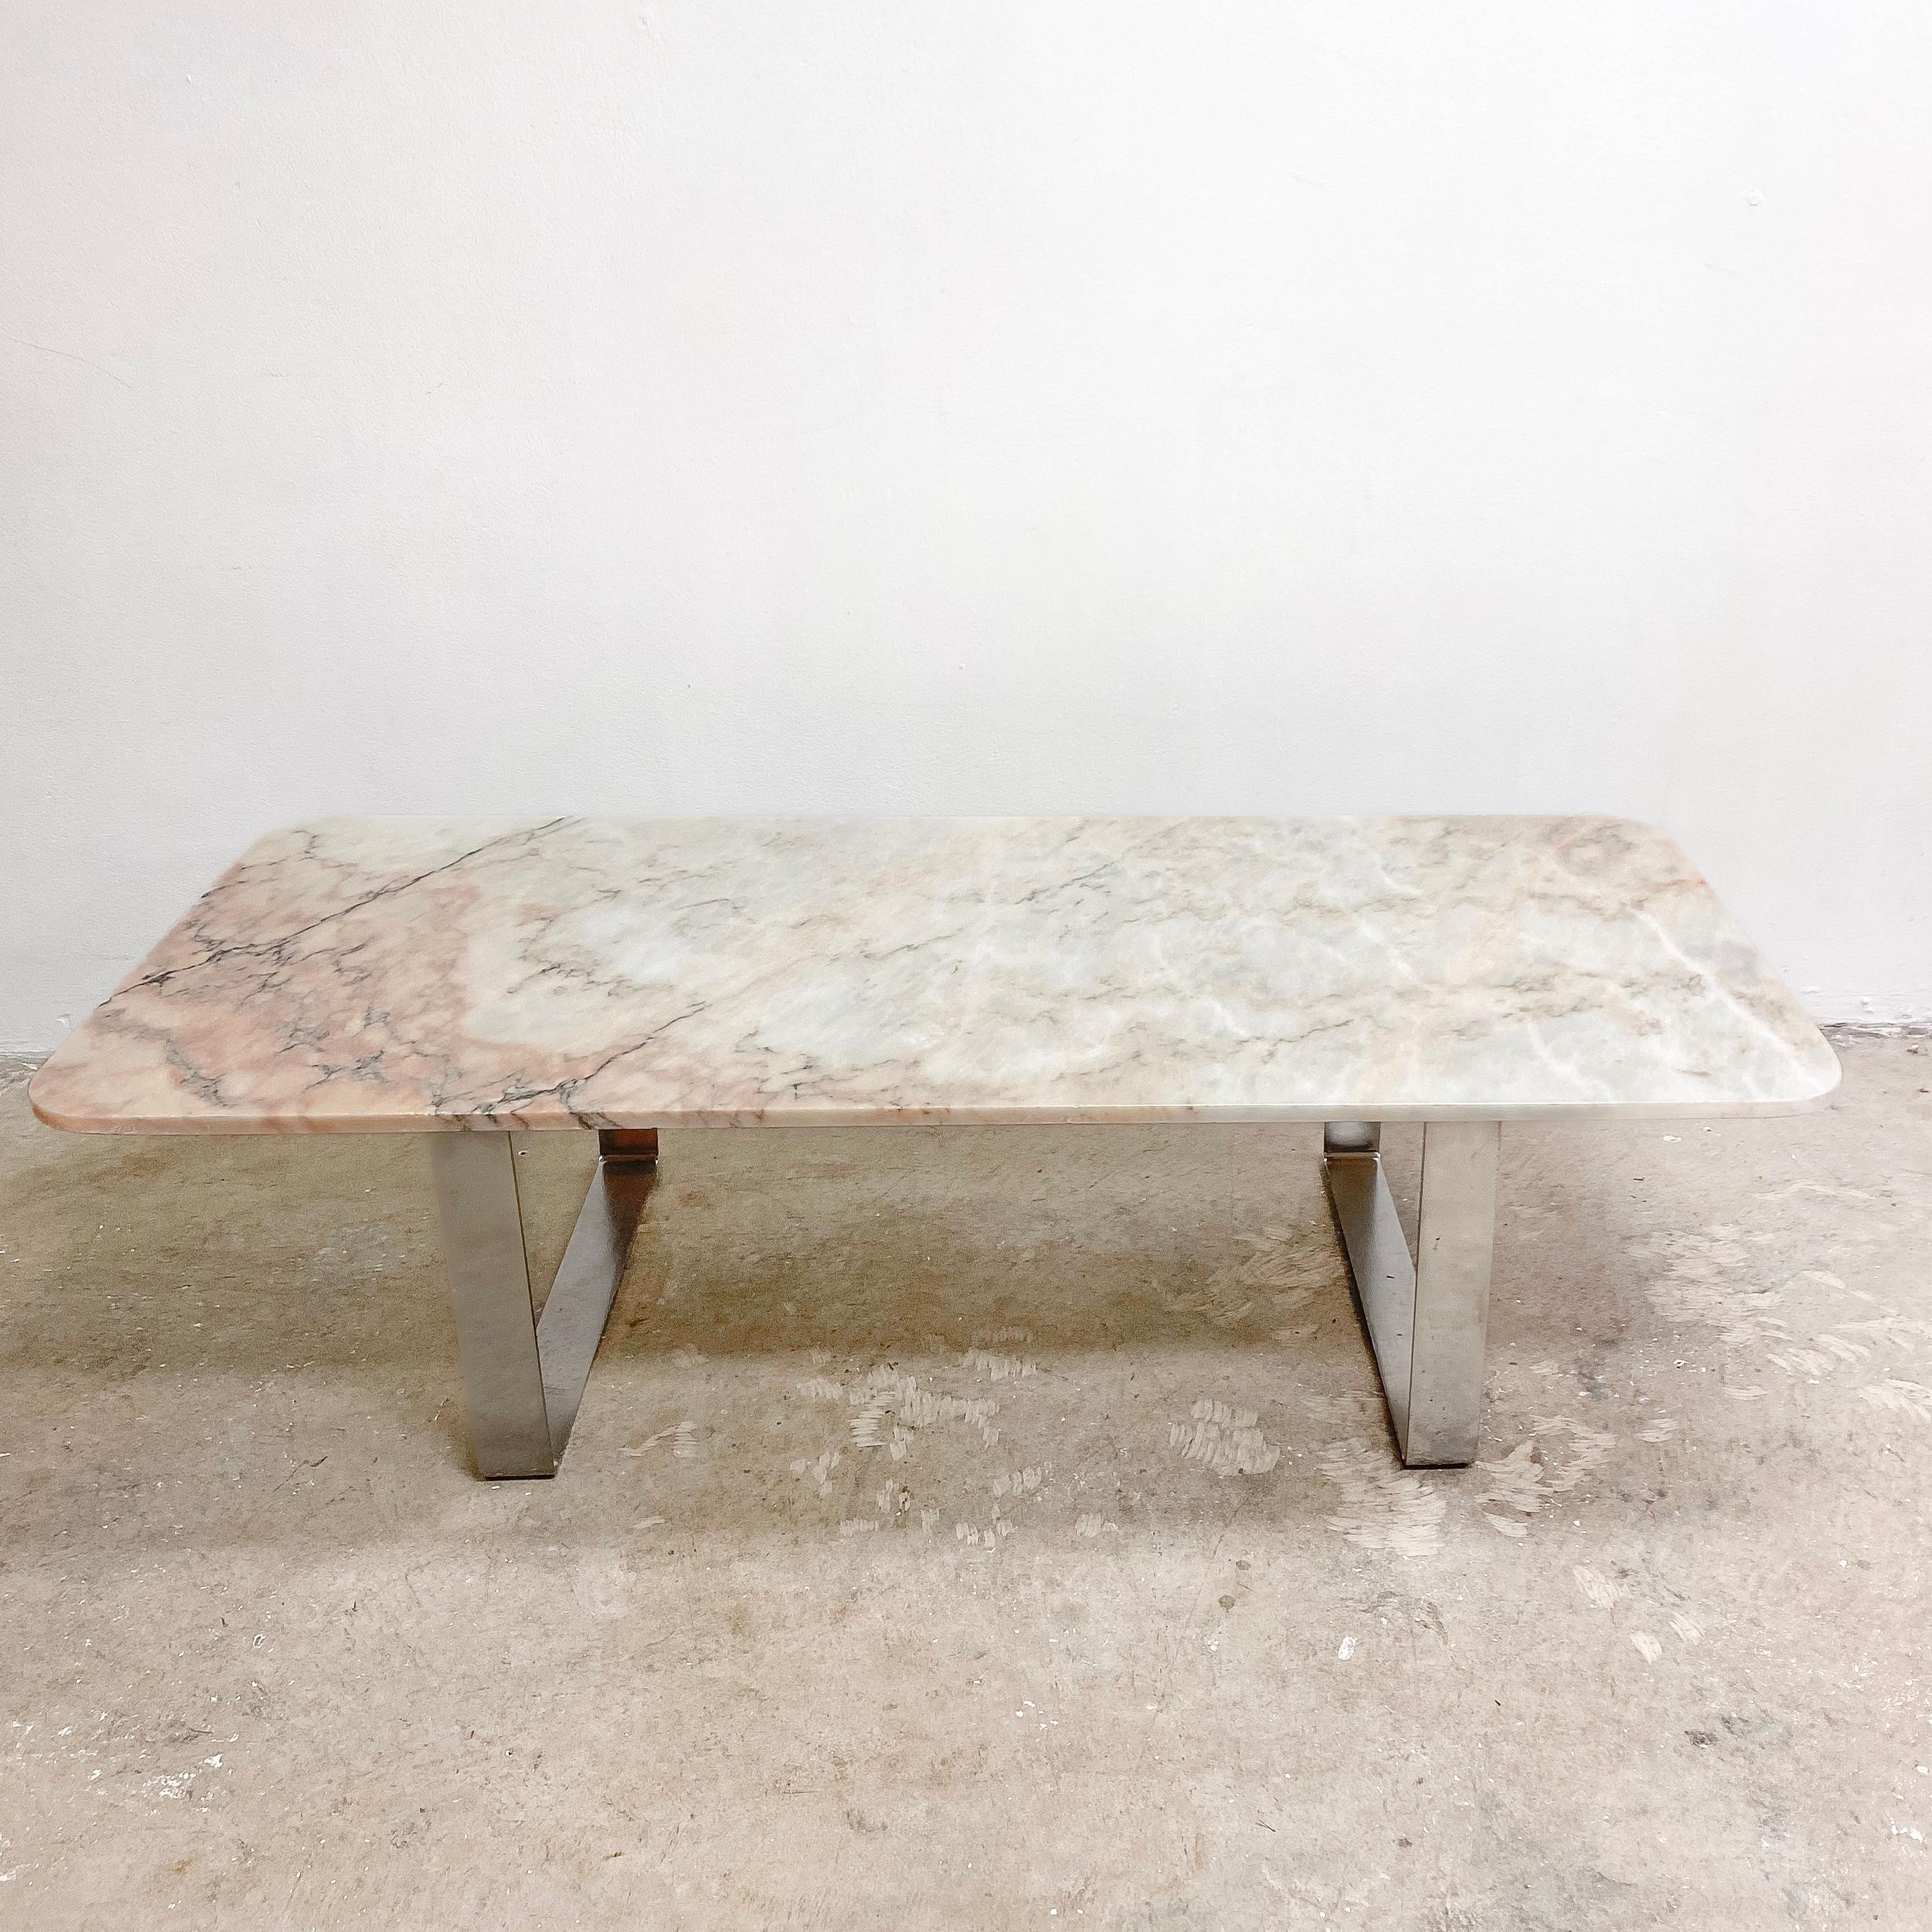 Stunning Danish post modern coffee table, with gorgeous pink Italian Carrara marble top and sleek minimal chrome base. A statement piece which would easily work in any contemporary home setting. In great condition, with minor signs of use